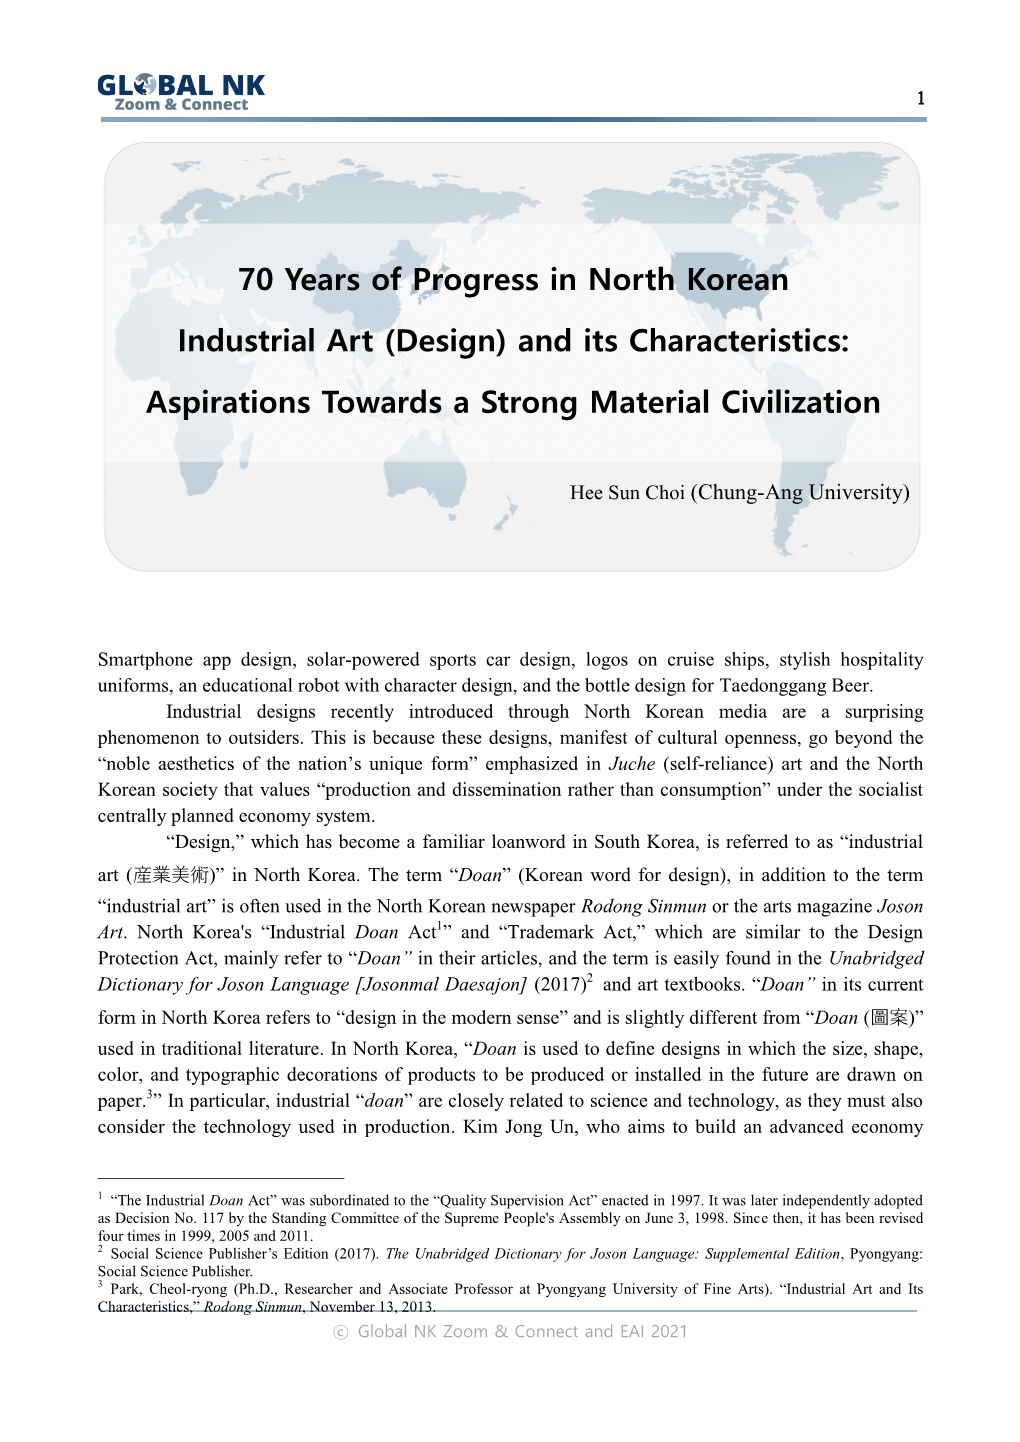 70 Years of Progress in North Korean Industrial Art (Design) and Its Characteristics: Aspirations Towards a Strong Material Civilization